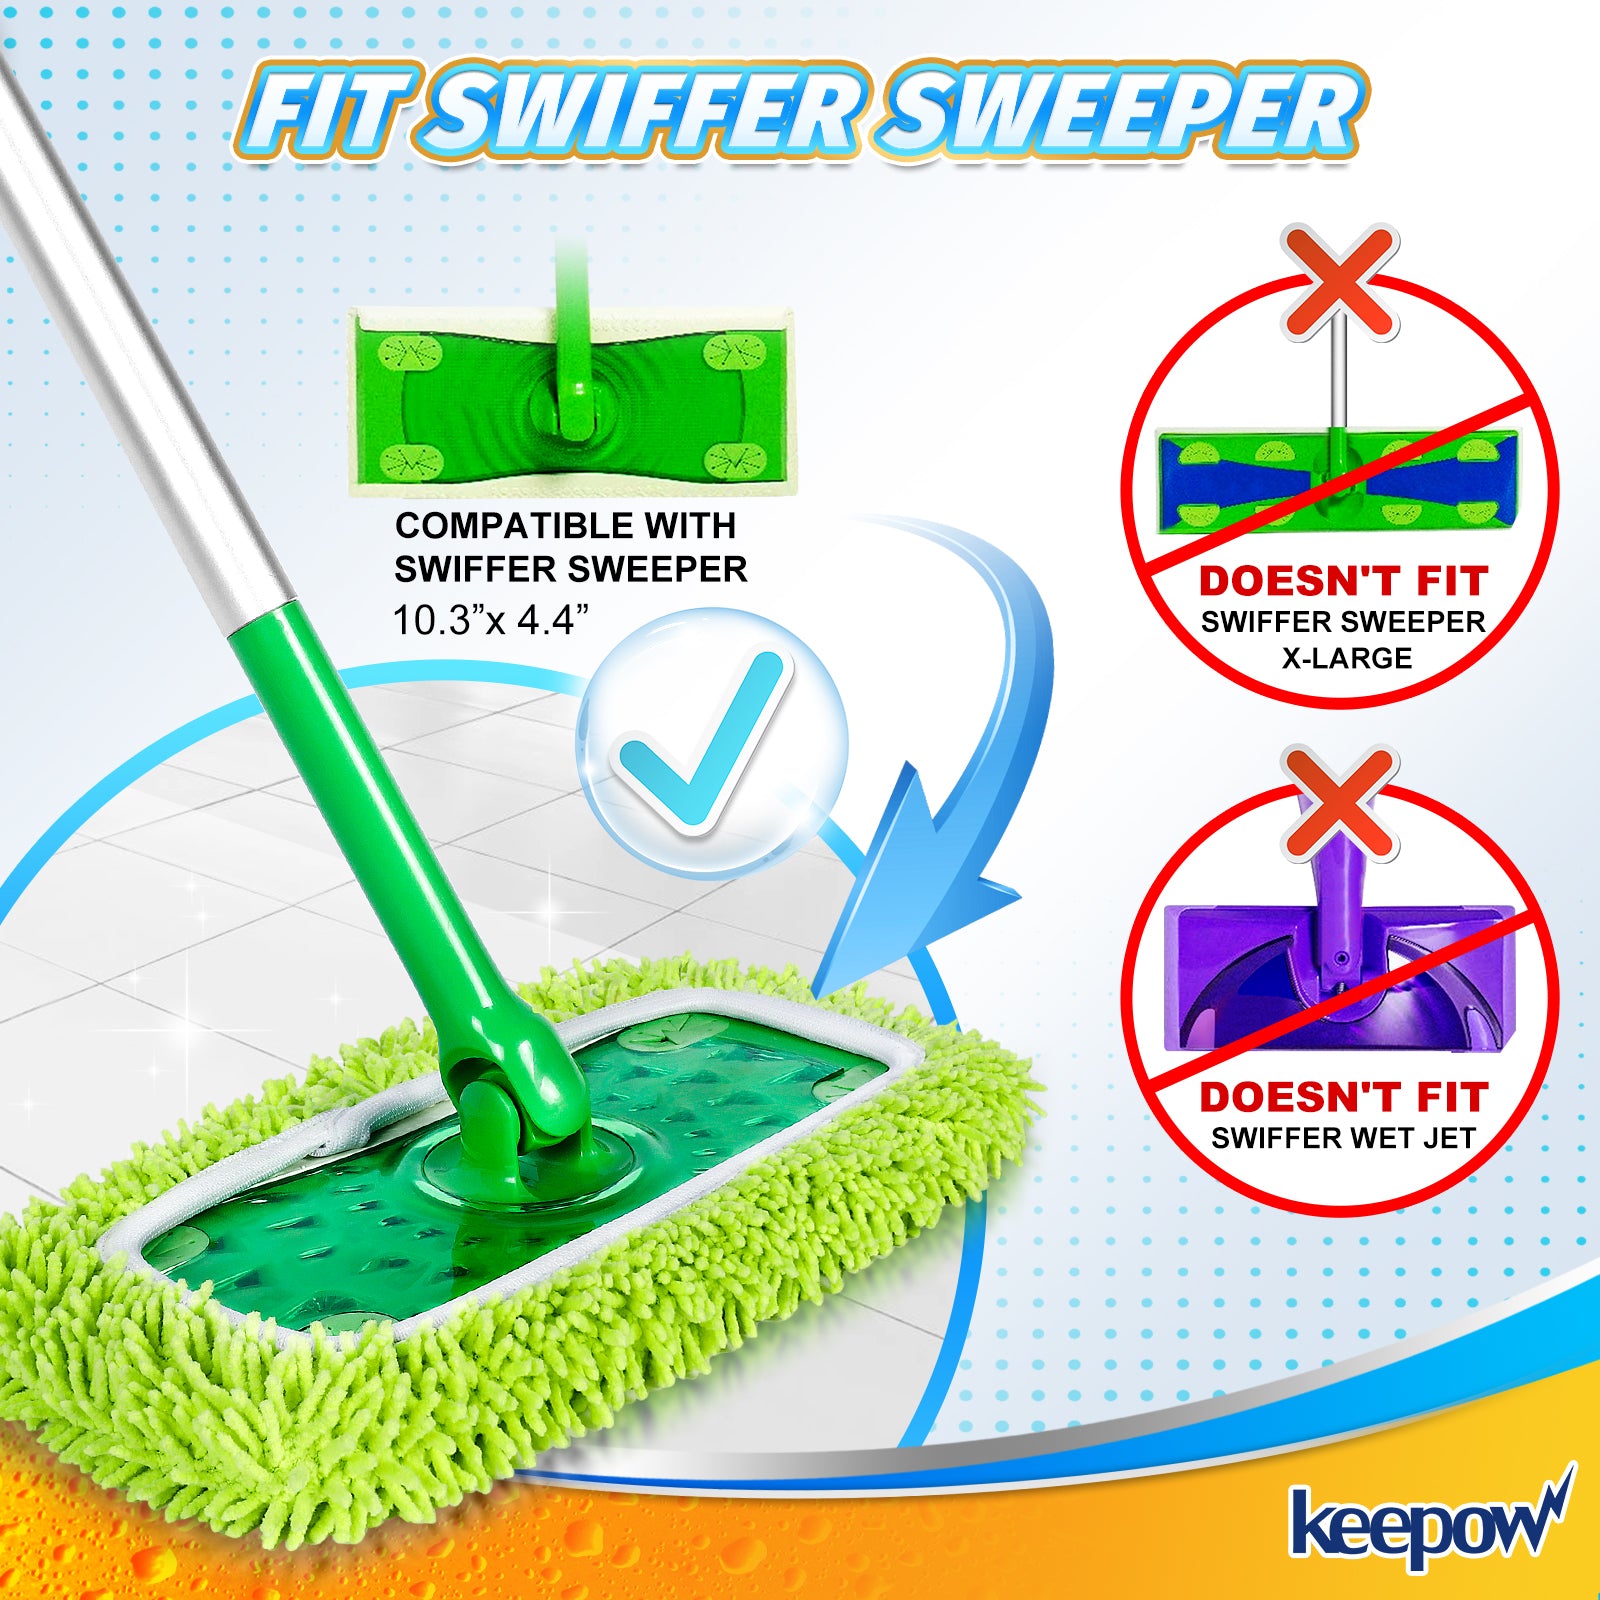 KEEPOW Reusable Microfiber Mop Pads Compatible with Swiffer Sweeper Mop, Dry Sweeping Cloths, Washable Wet Mopping Cloth Refills for Surface/Hardwood Floor Cleaning, 4 Pack (Mop is Not Included)